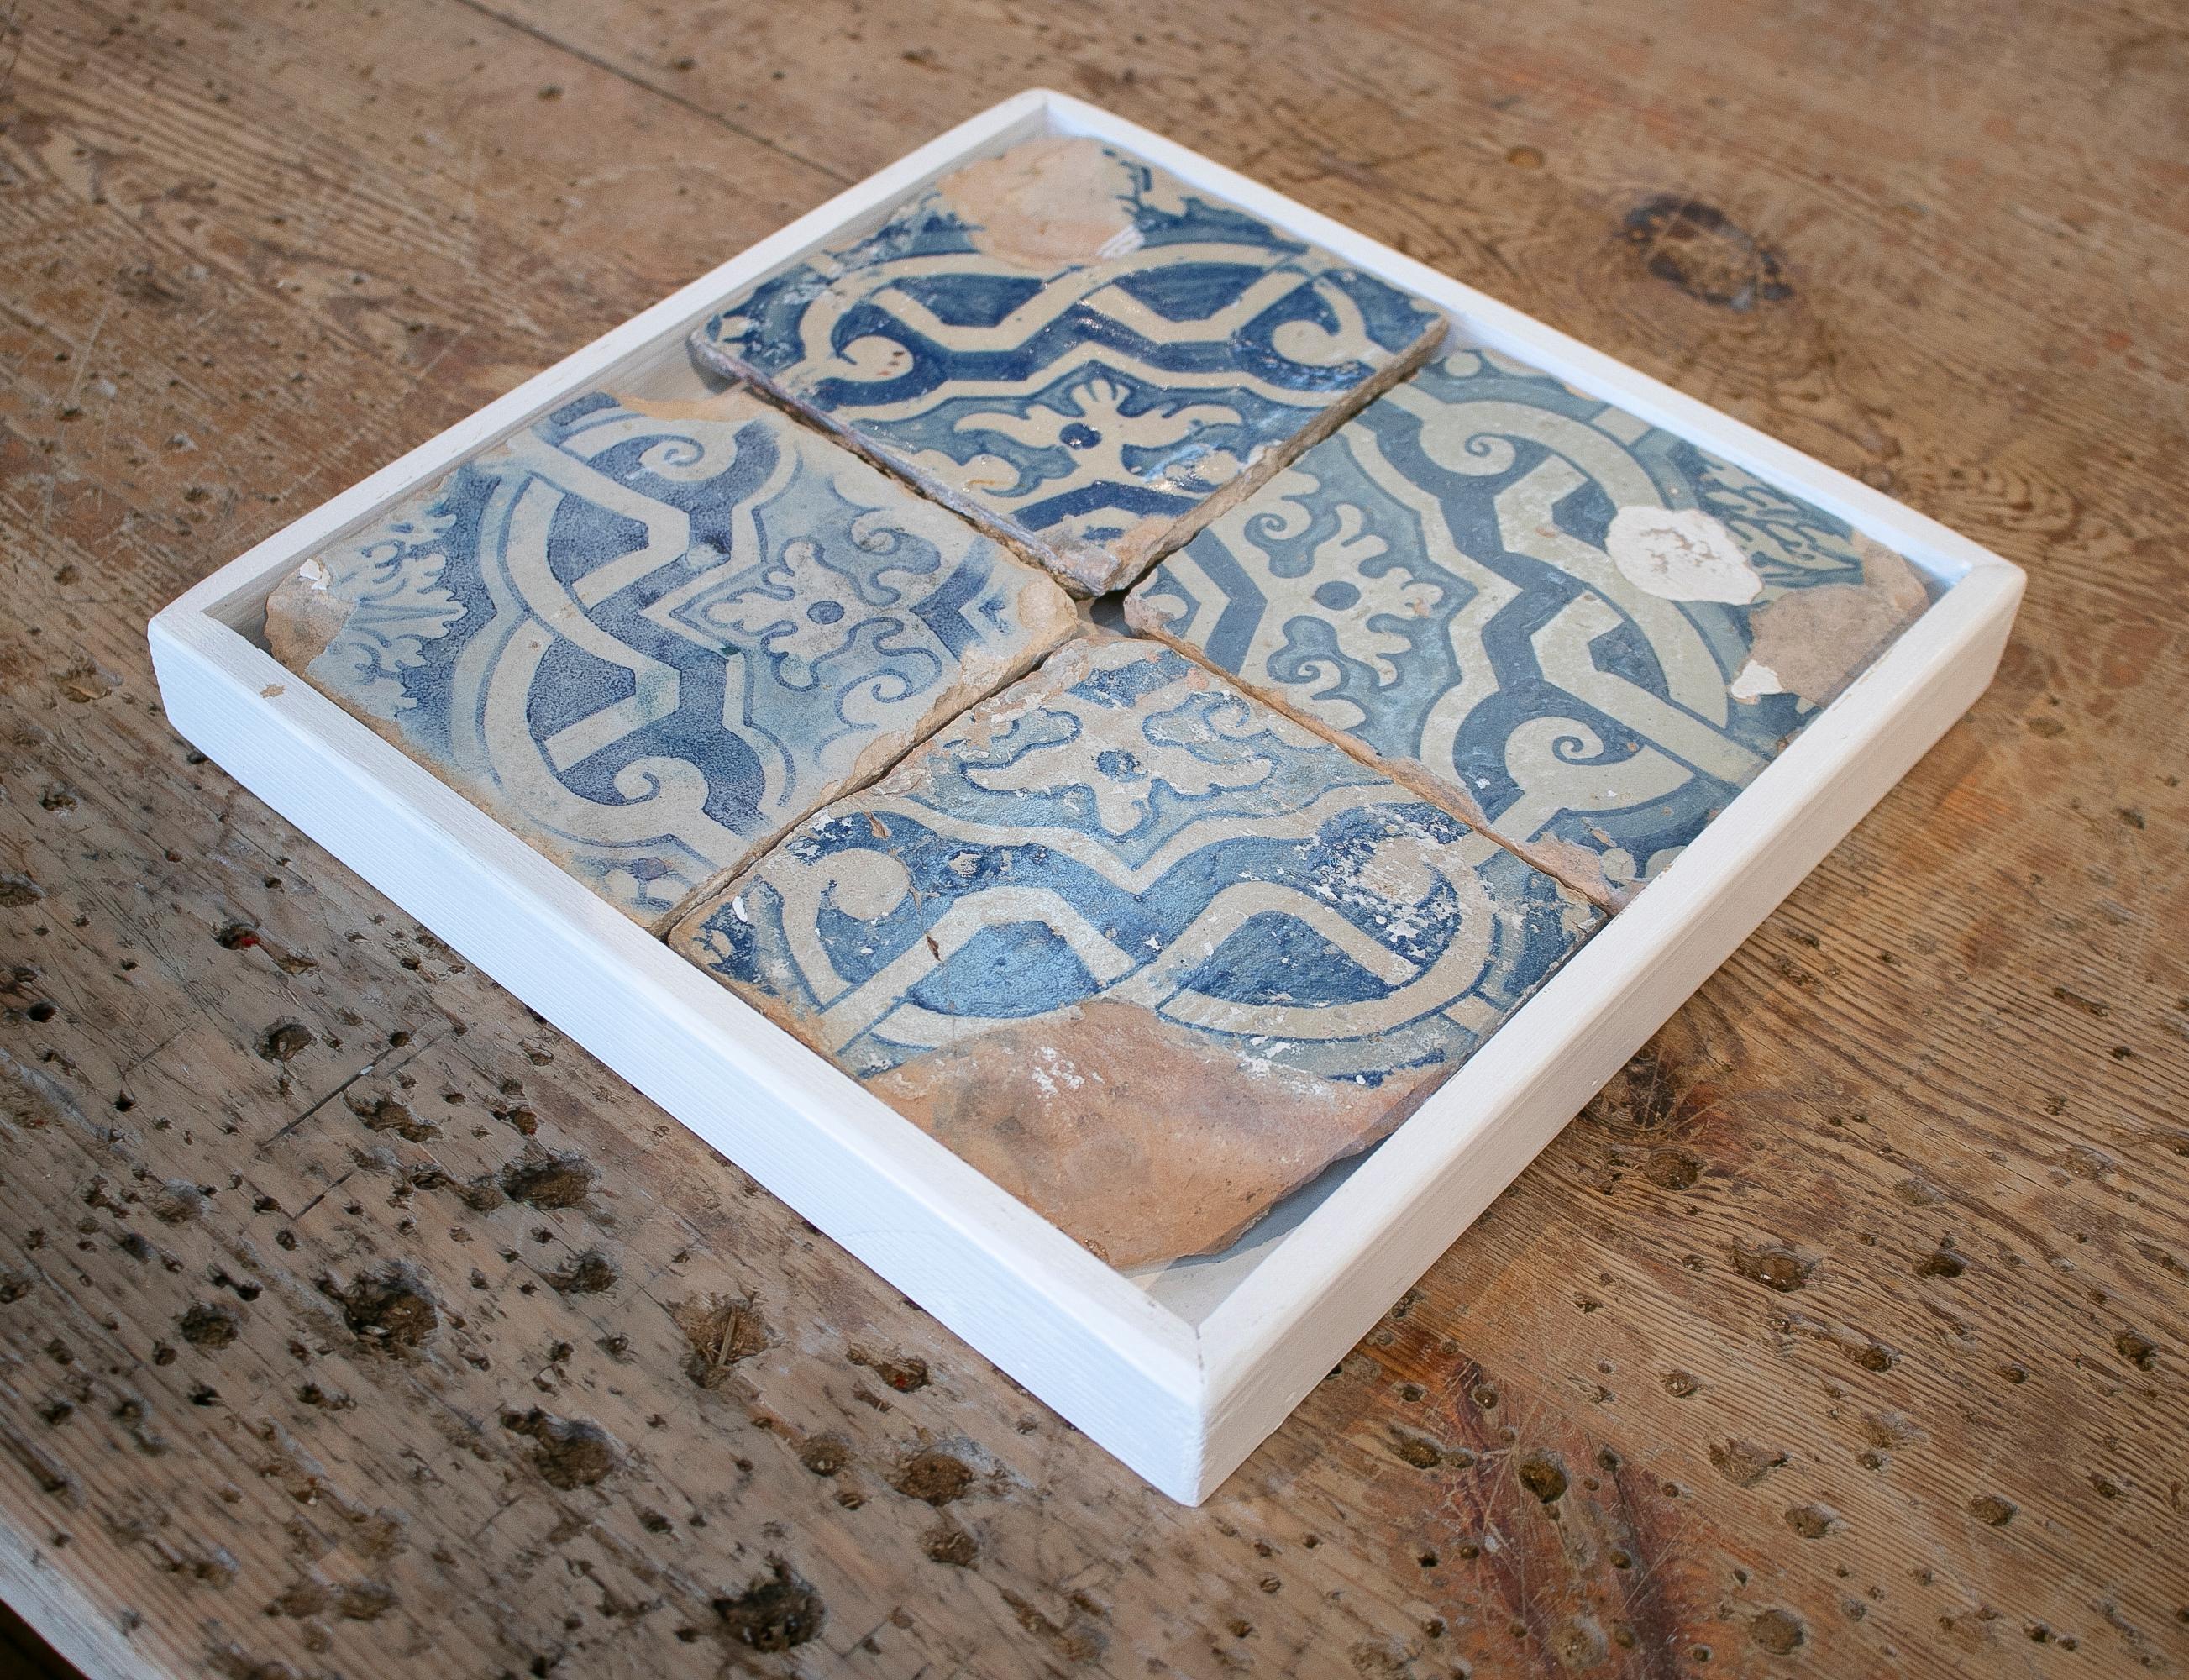 18th century Spanish set of 4 framed cobal blue glazed ceramic tiles with geometric pattern. 

Dimensions with frame: 30 x 30.